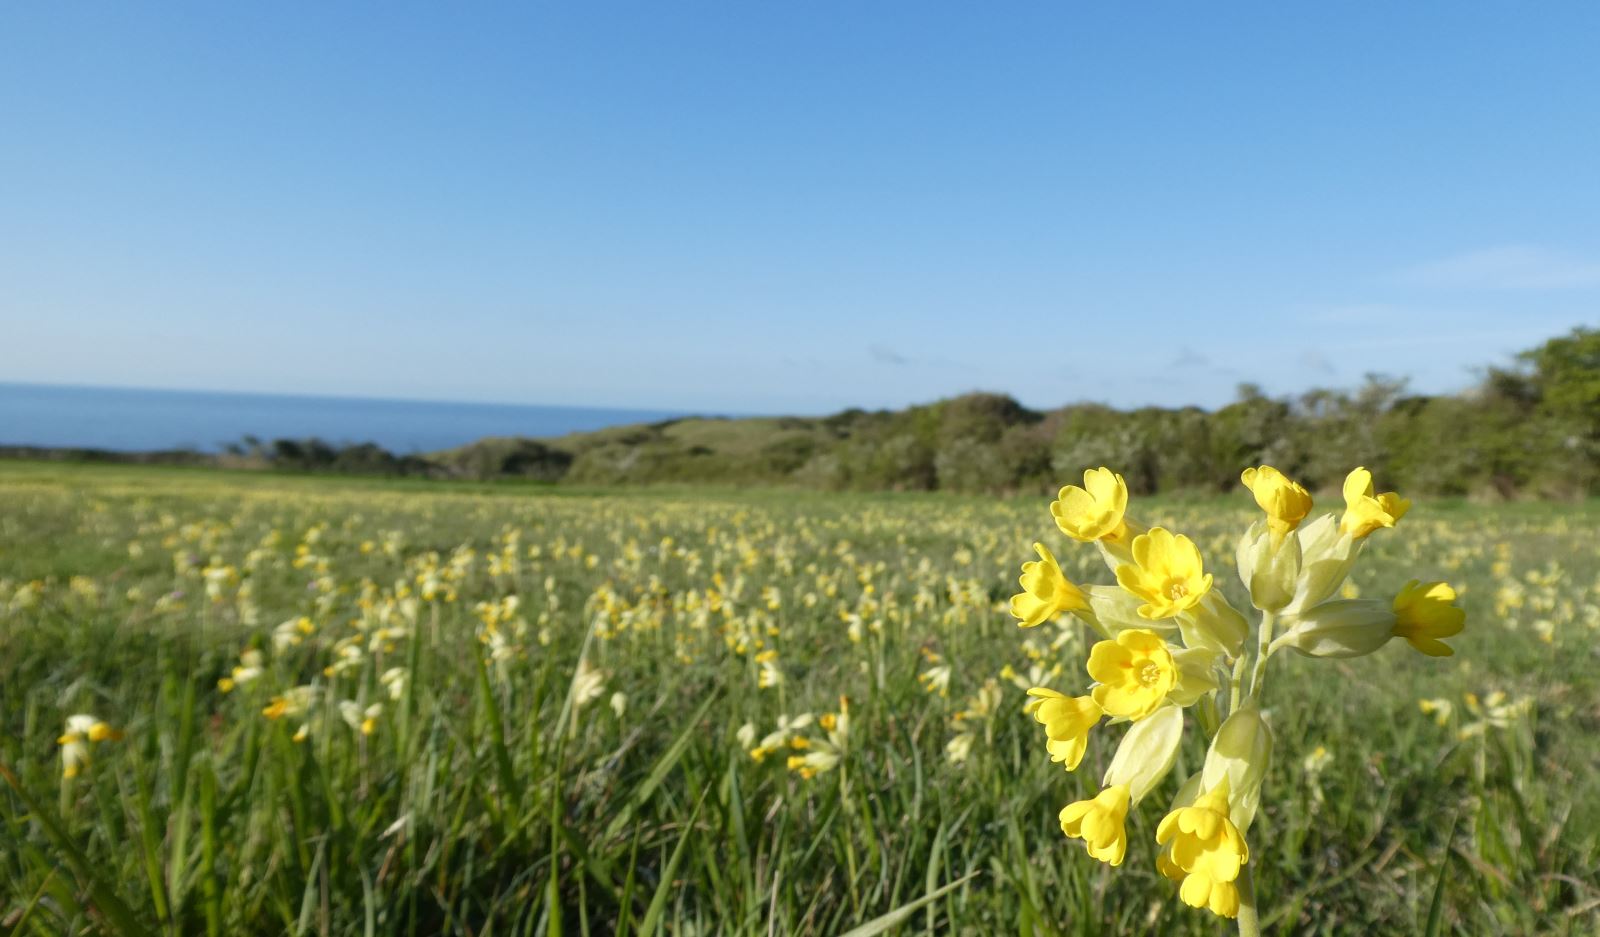 Yellow Cowslips in flower across a meadow with the sea visible in the distance